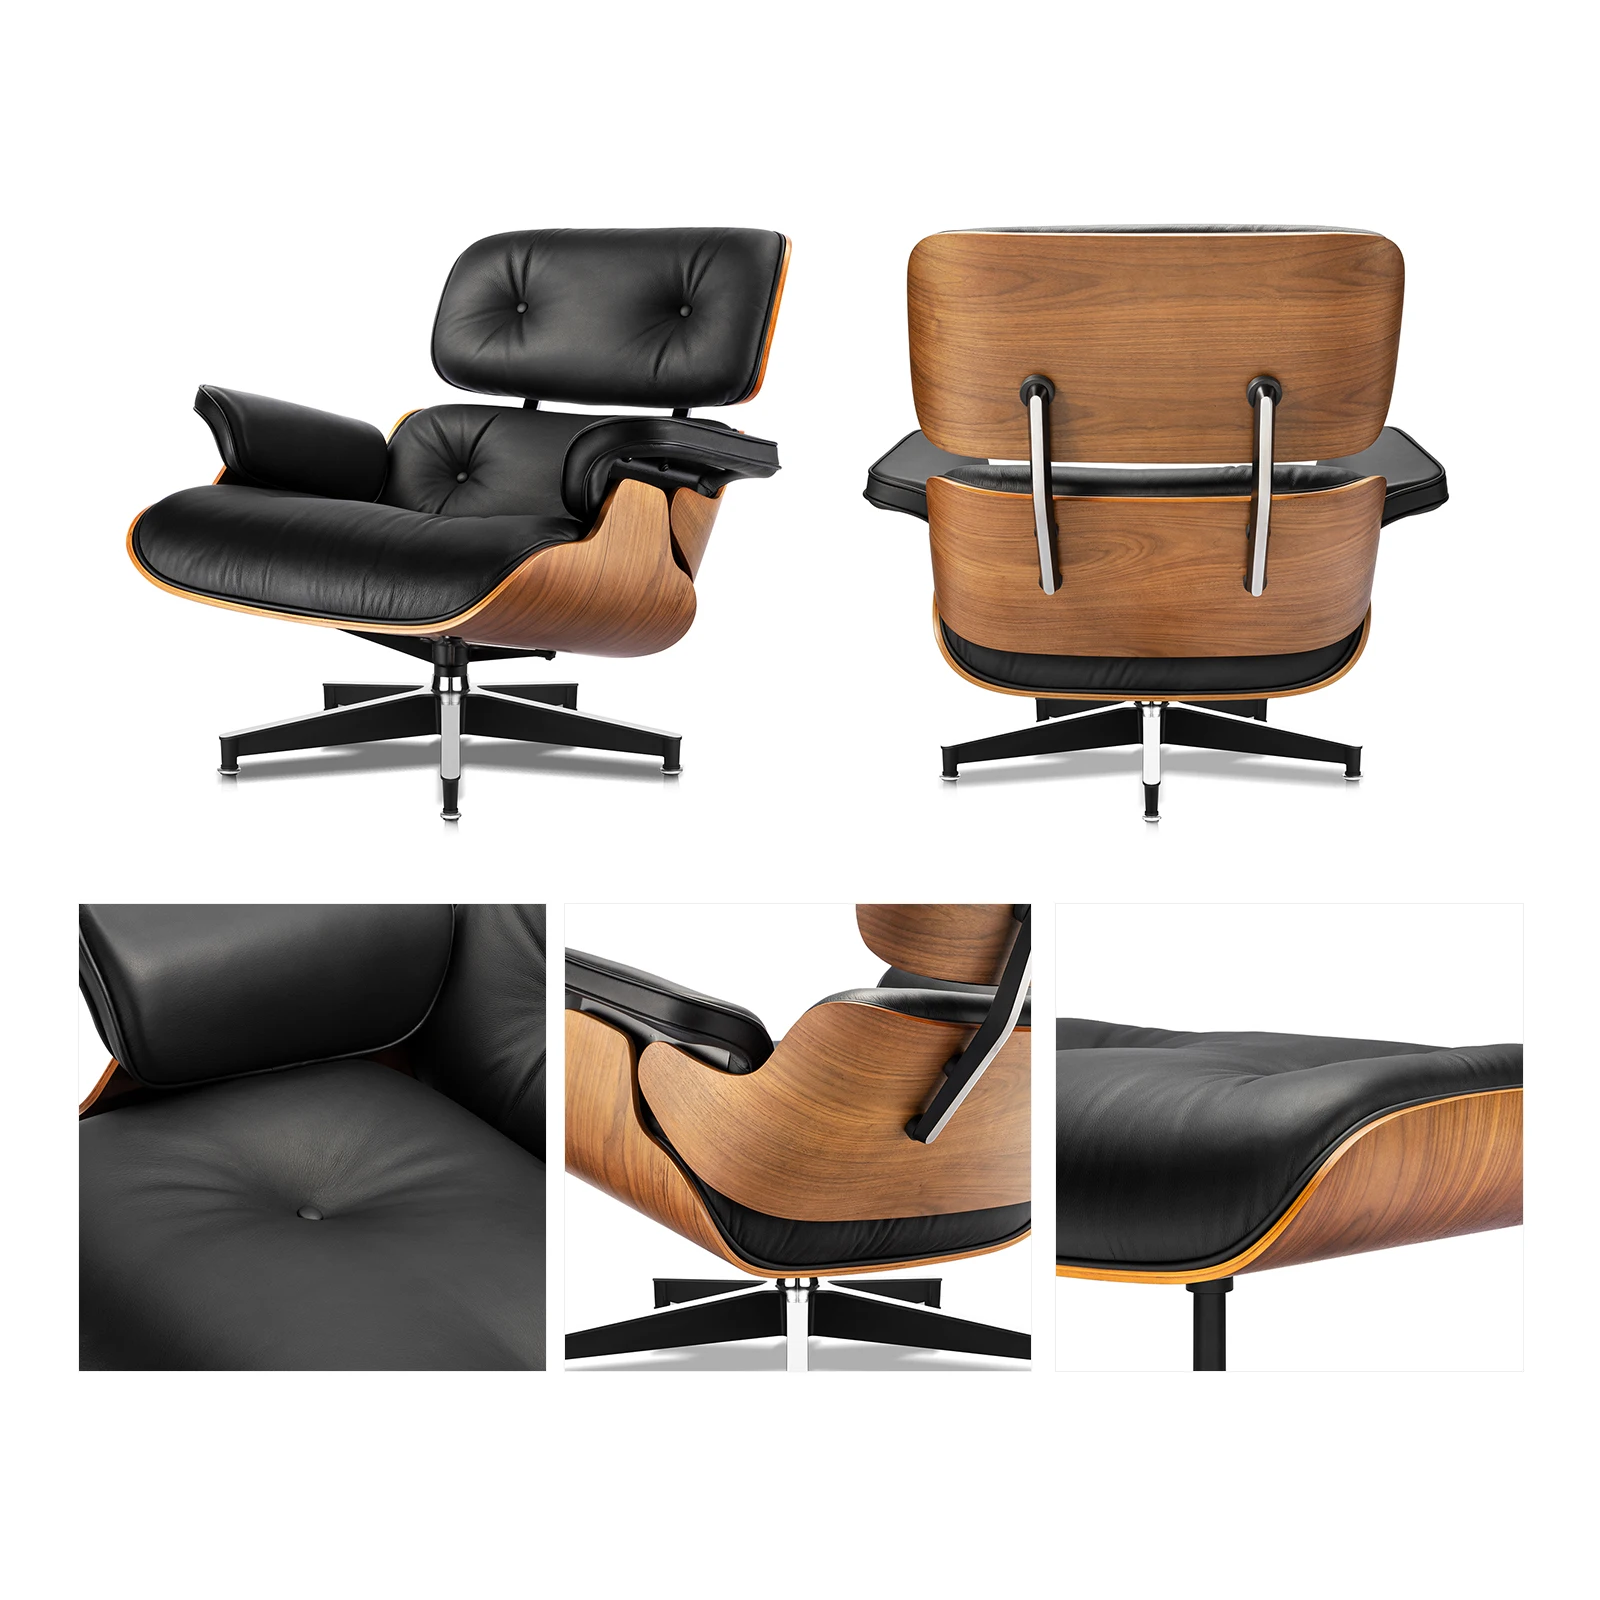 Daedalus Designs - Eames Mid-Century American Lounge Chair and Ottoman by Herman Miller | Genuine Leather | Walnut & Palisander Wood - Review